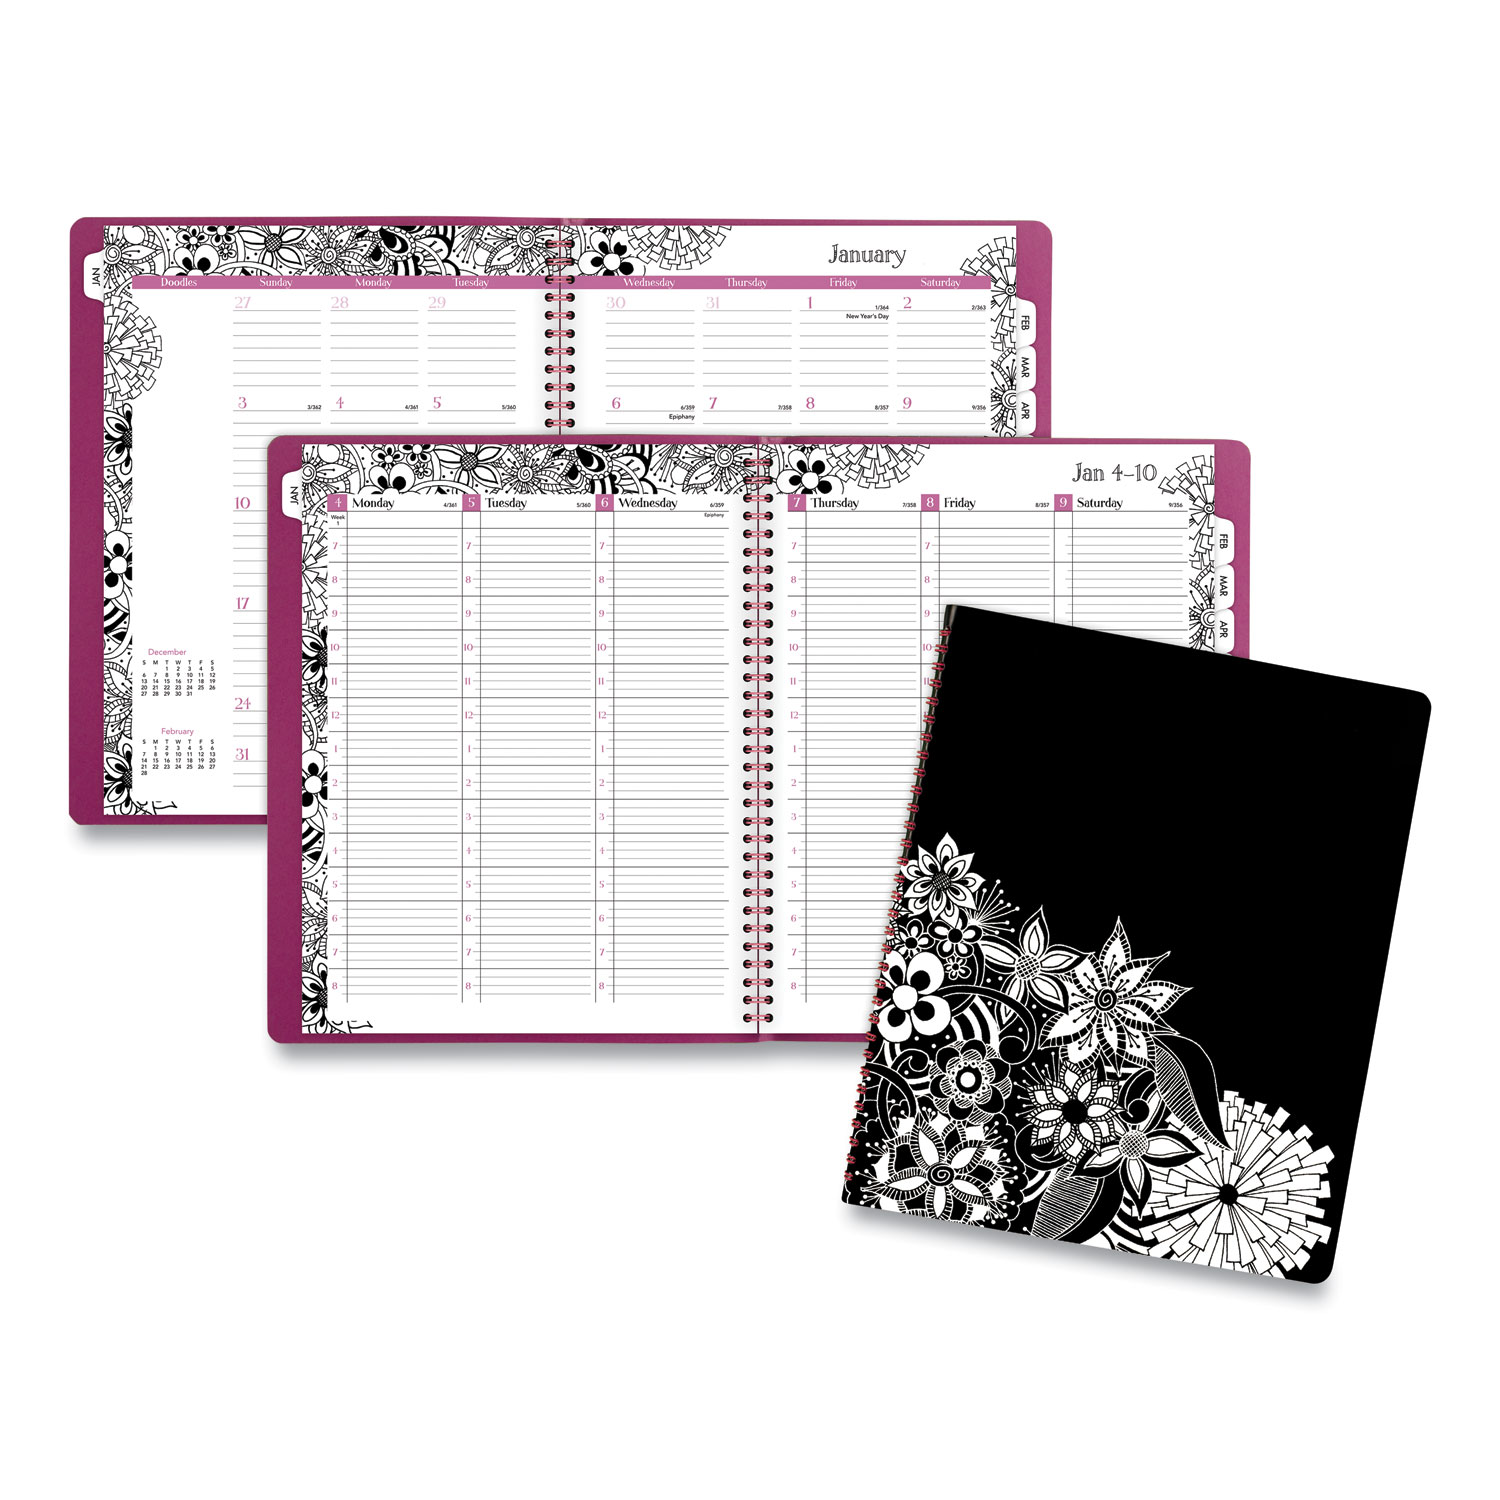  Cambridge 589-905 Floradoodle Professional Weekly/Monthly Planner, 11 x 8 1/2, 2020-2021 (AAG589905) 